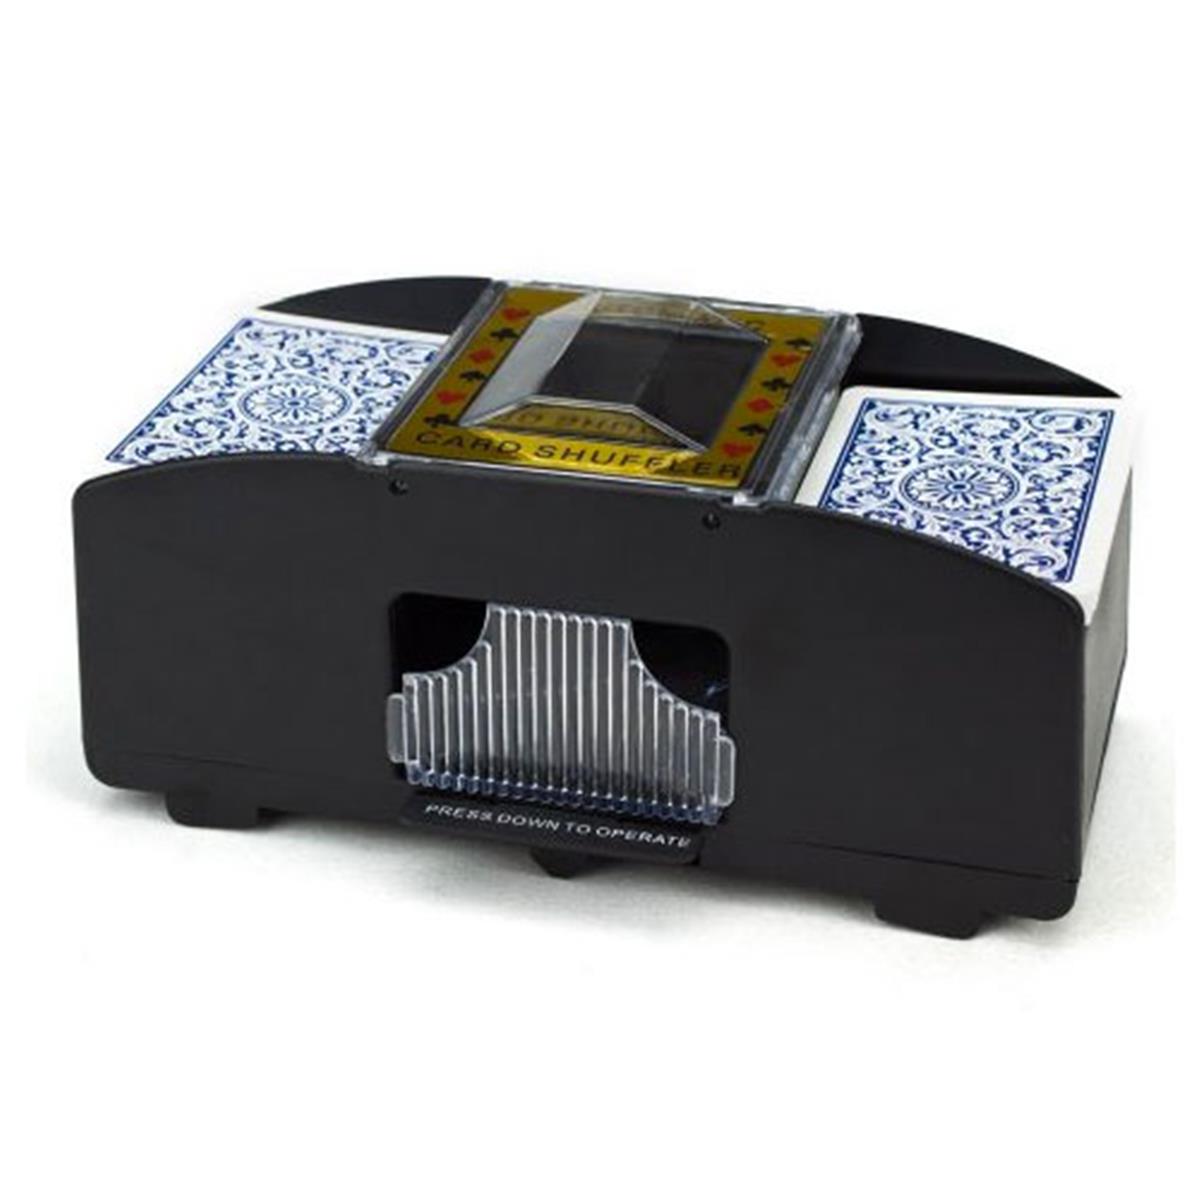 Picture of Brybelly GSHU-001 2 Deck Playing Card Shuffler